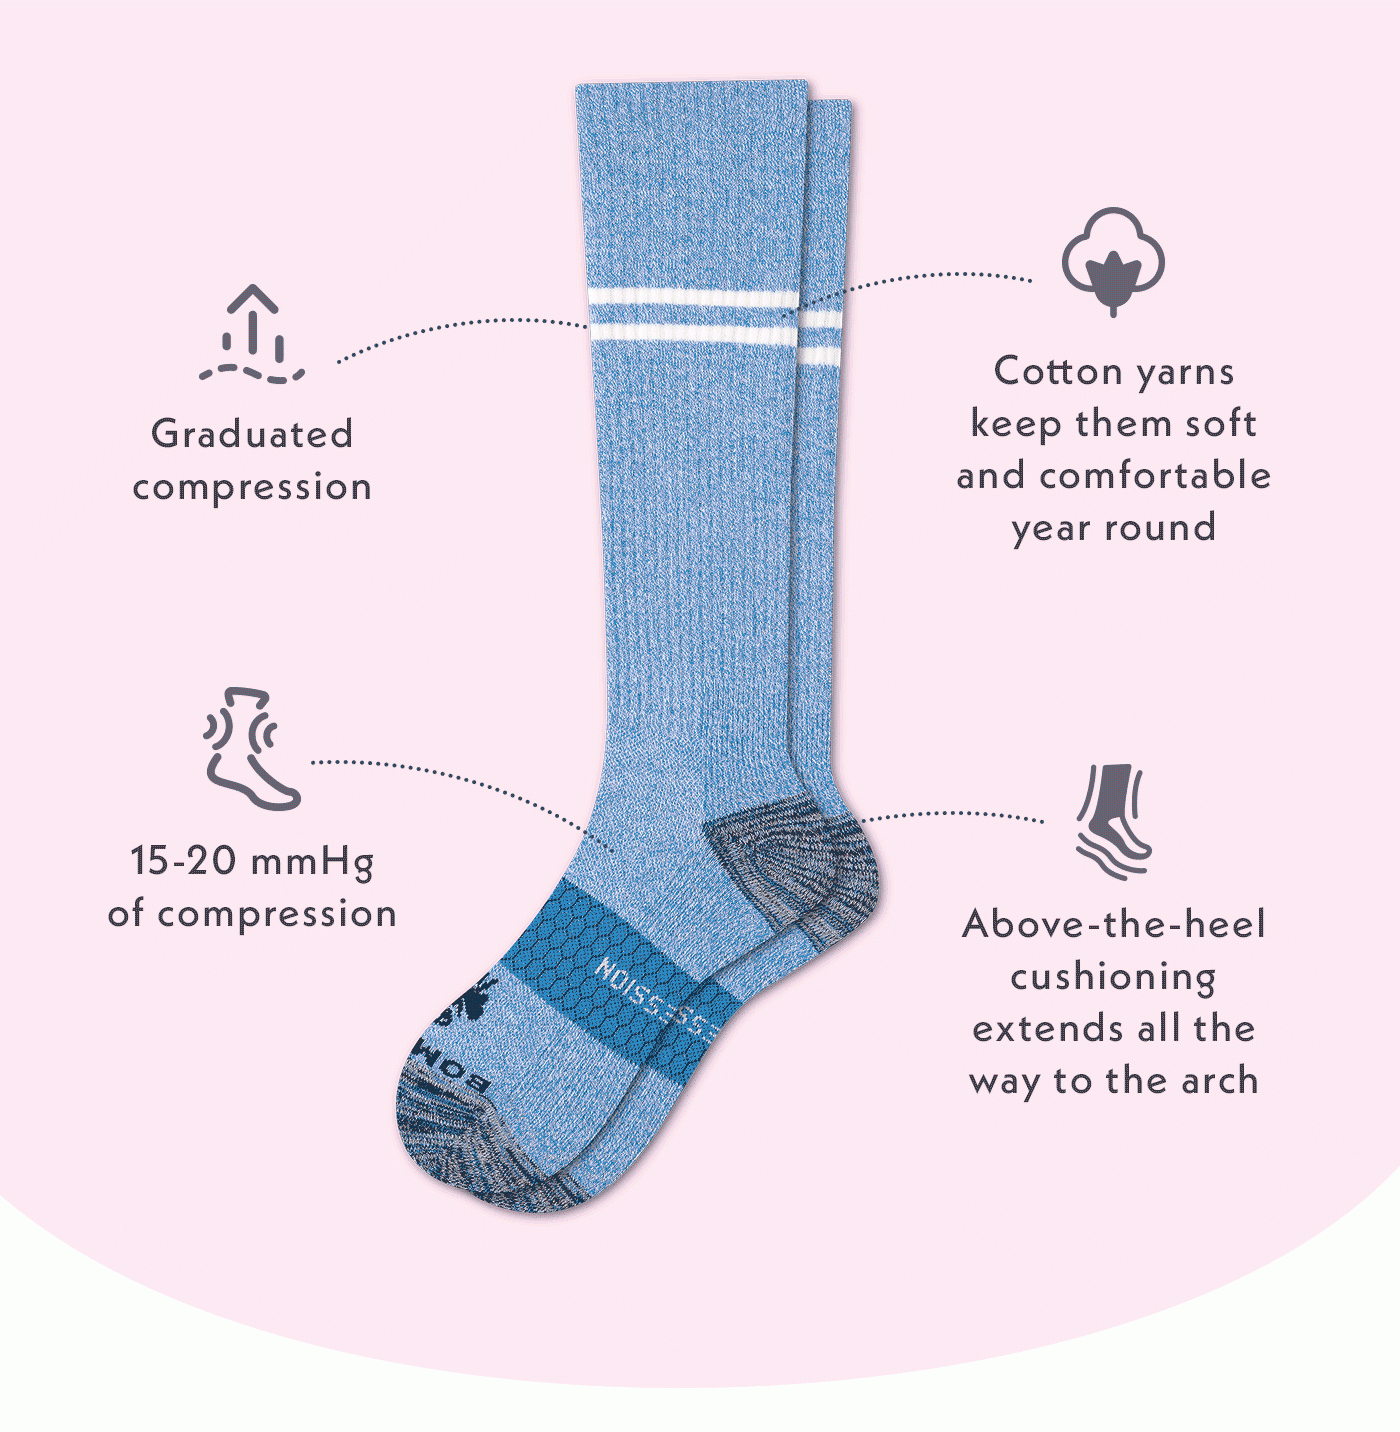 Graduated compression | Cotton yarns keep them soft and comfortable year round | 15-20 mmHg of compression | Above the heel cushioning extends all the way to the arch